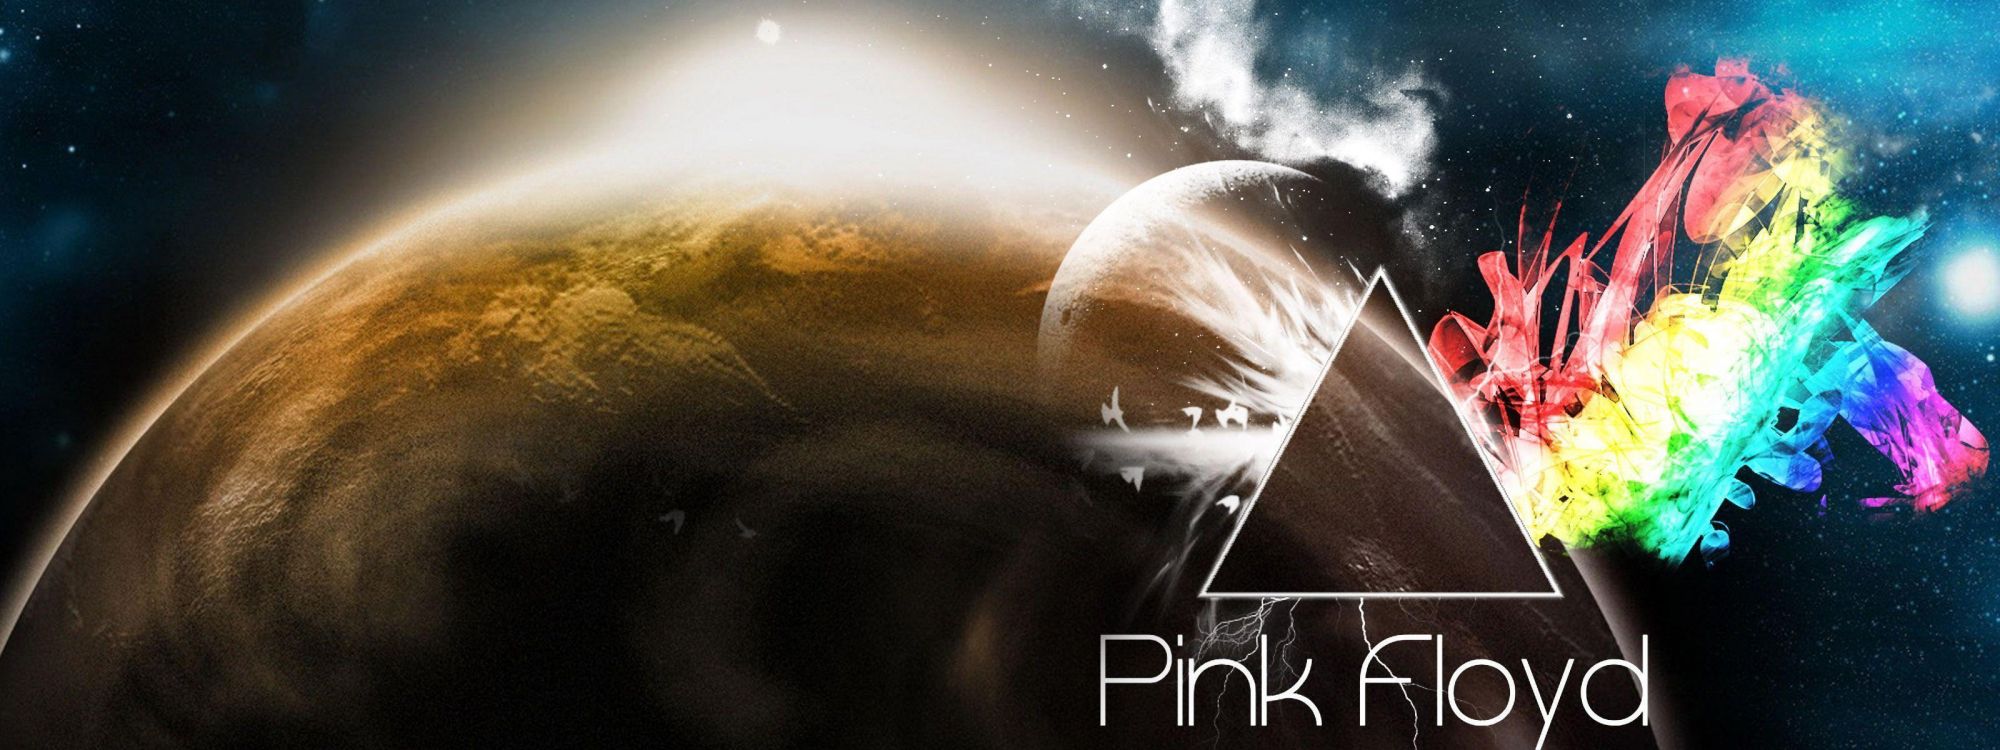 Pink Floyd, Progressive Rock, The Dark Side of The Moon, Space, Outer Space. Wallpaper in 3200x1200 Resolution